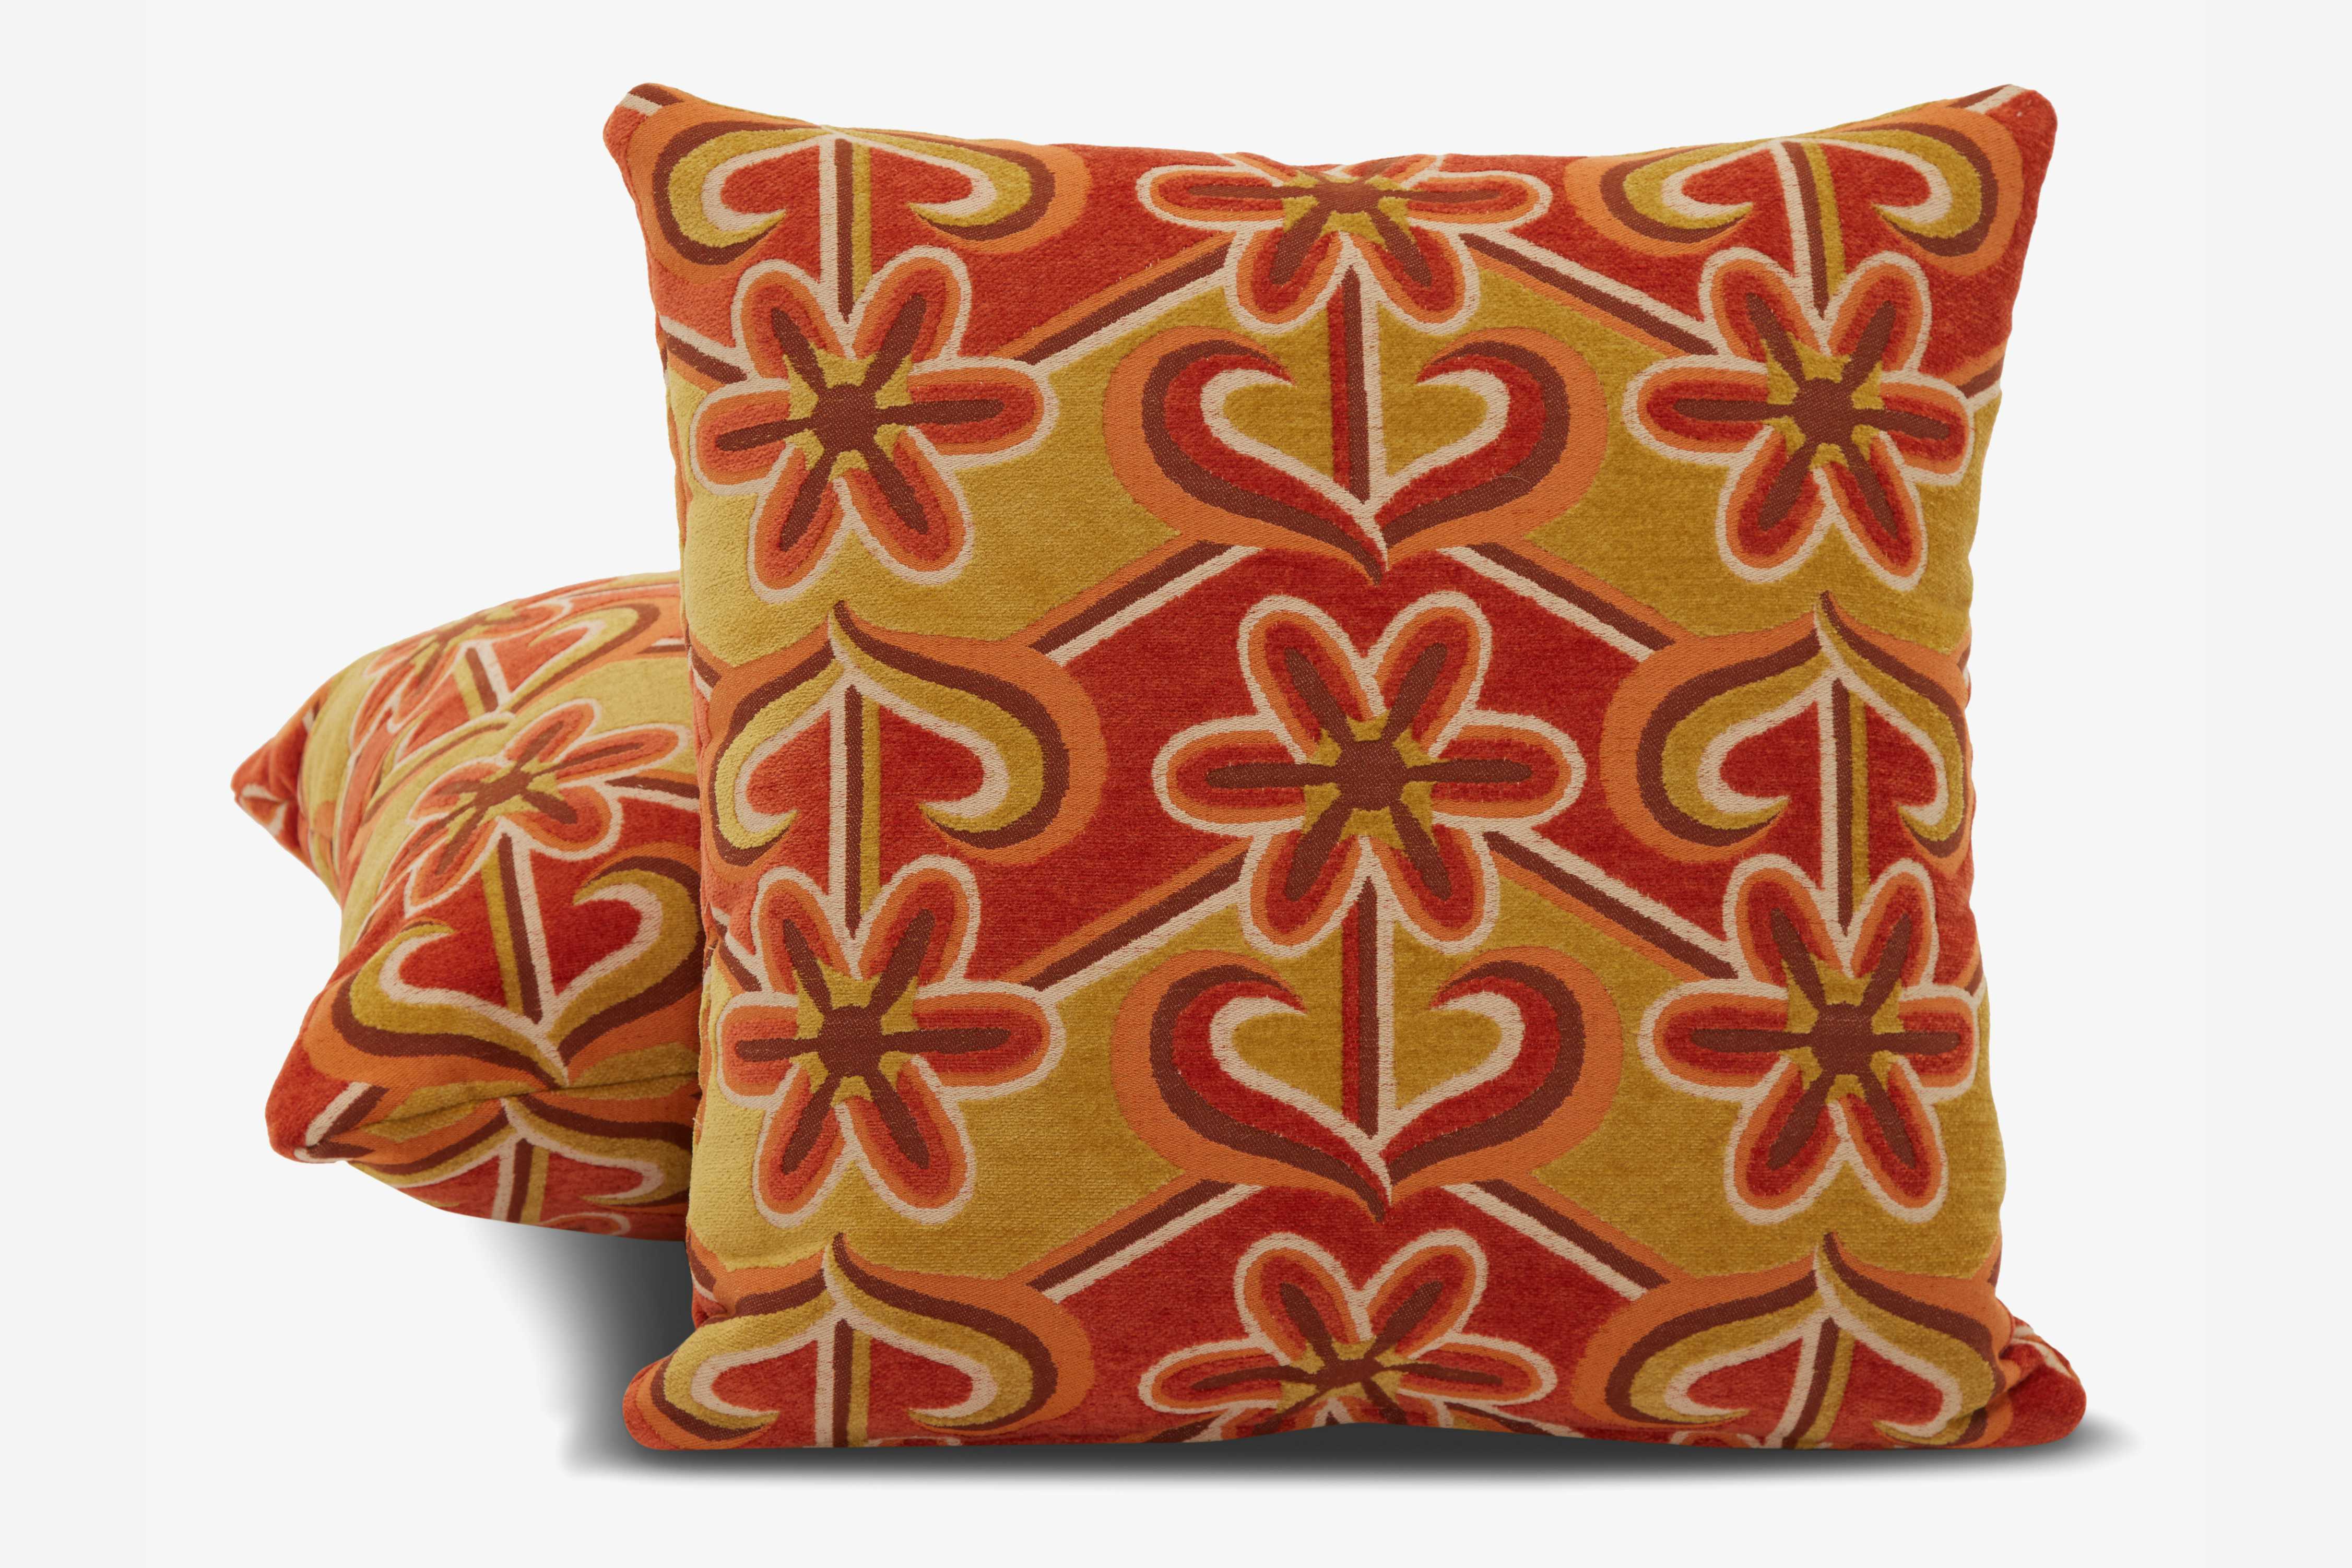 Sunny Chevy Decorative Knife Edge Pillows 22x22 (Set (Limited Edition)